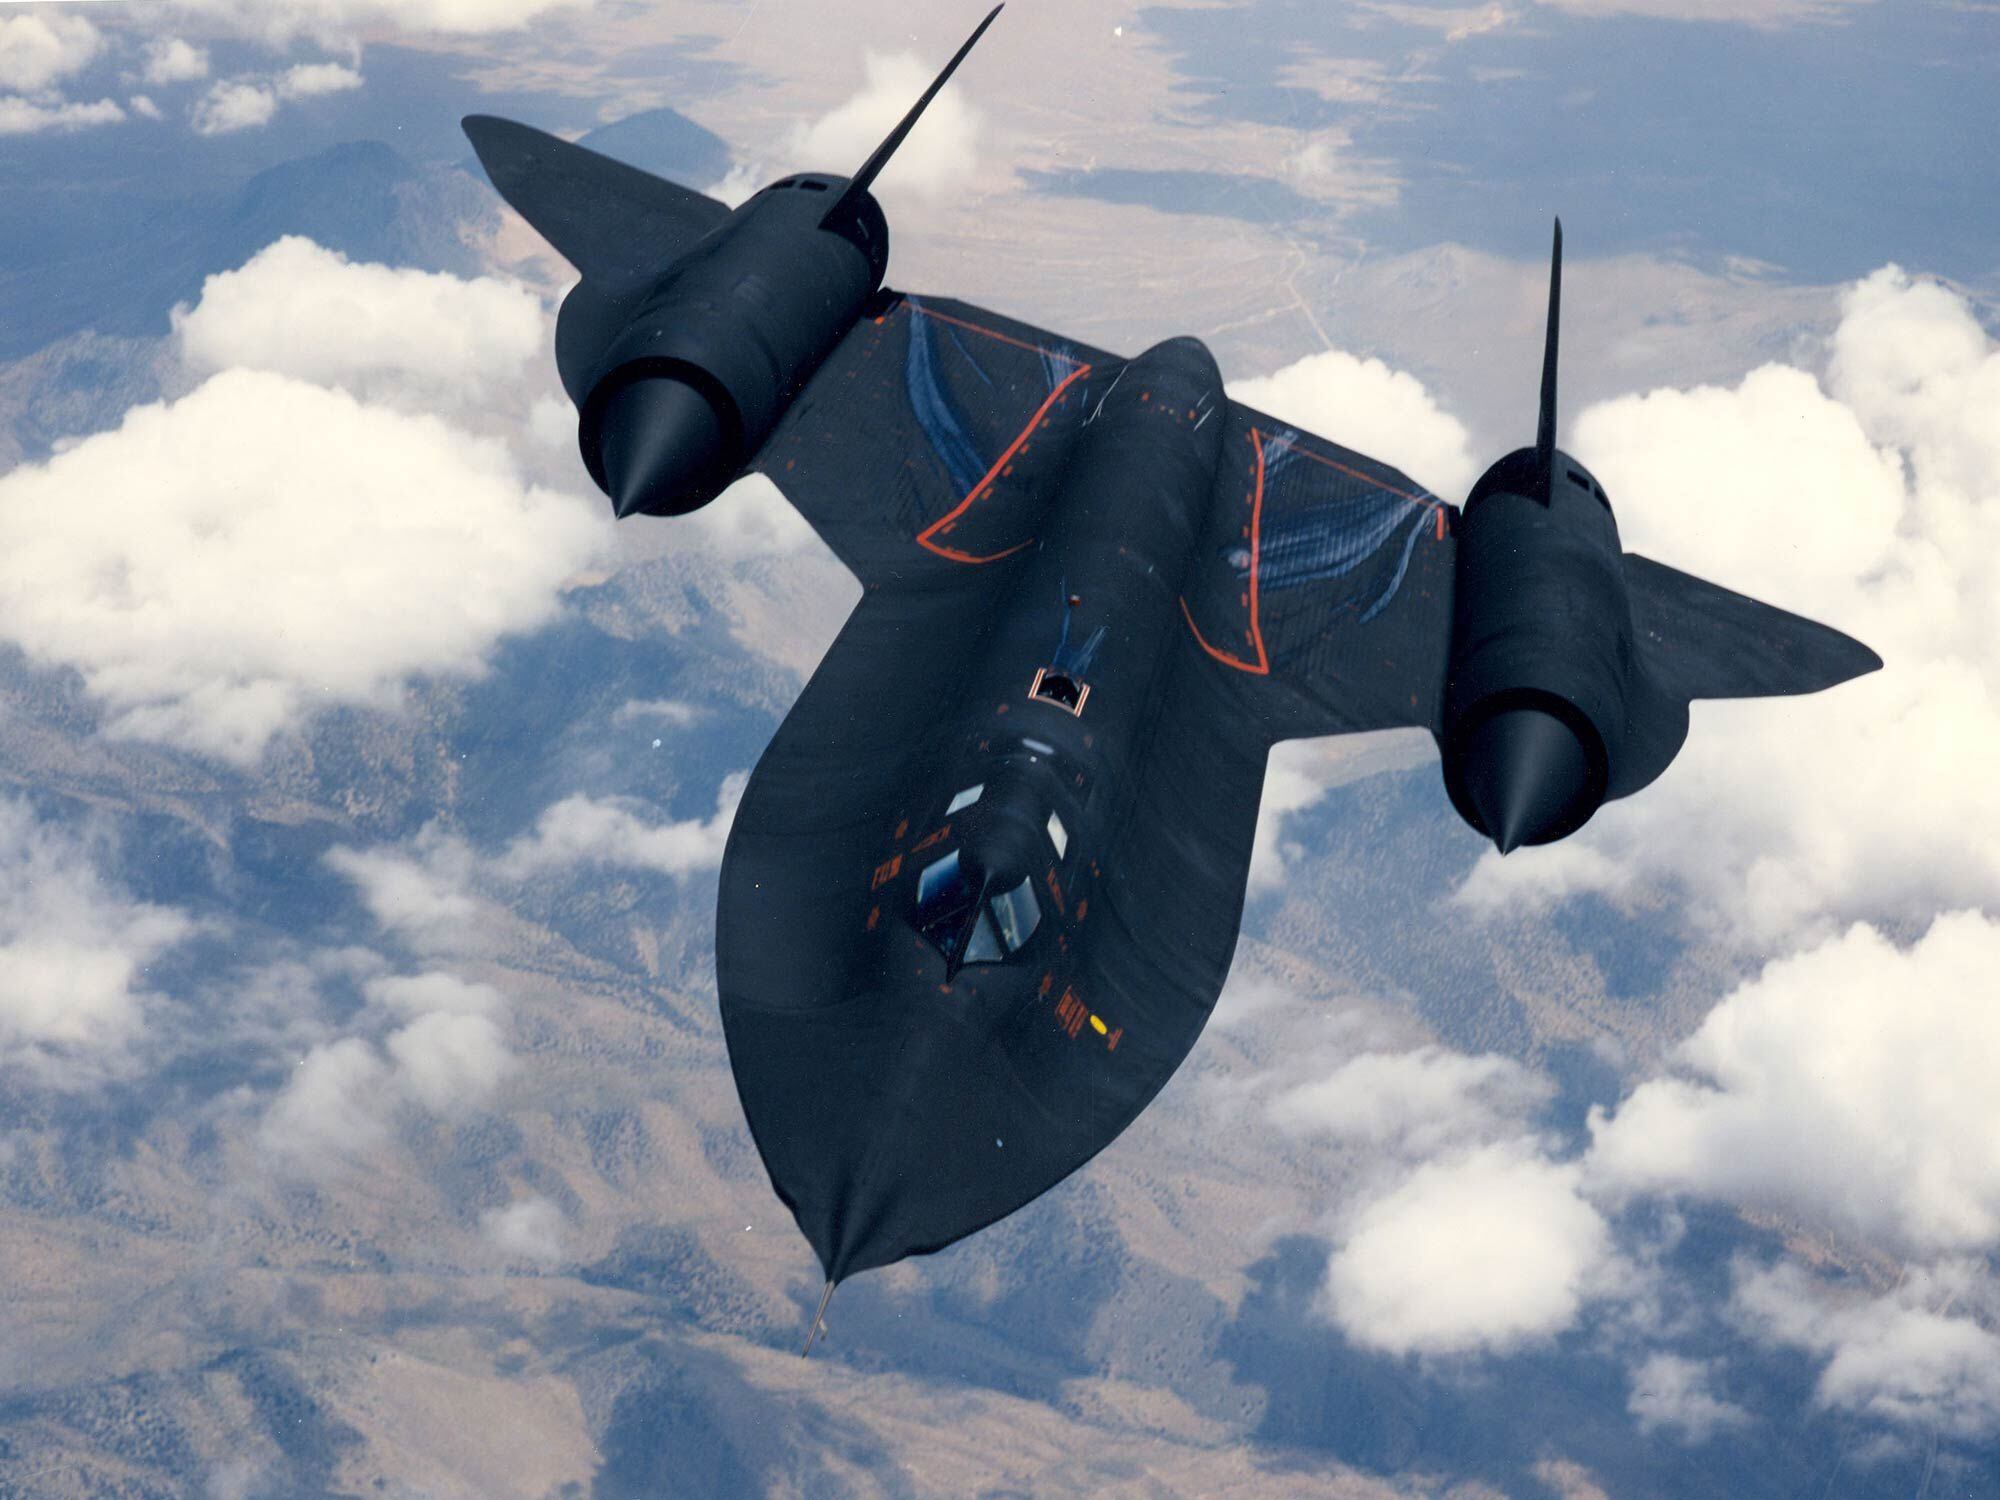 As speed increases so does friction—and heat. At three times the speed of sound, solutions are needed to protect the SR-71’s engine from overtemp damage.